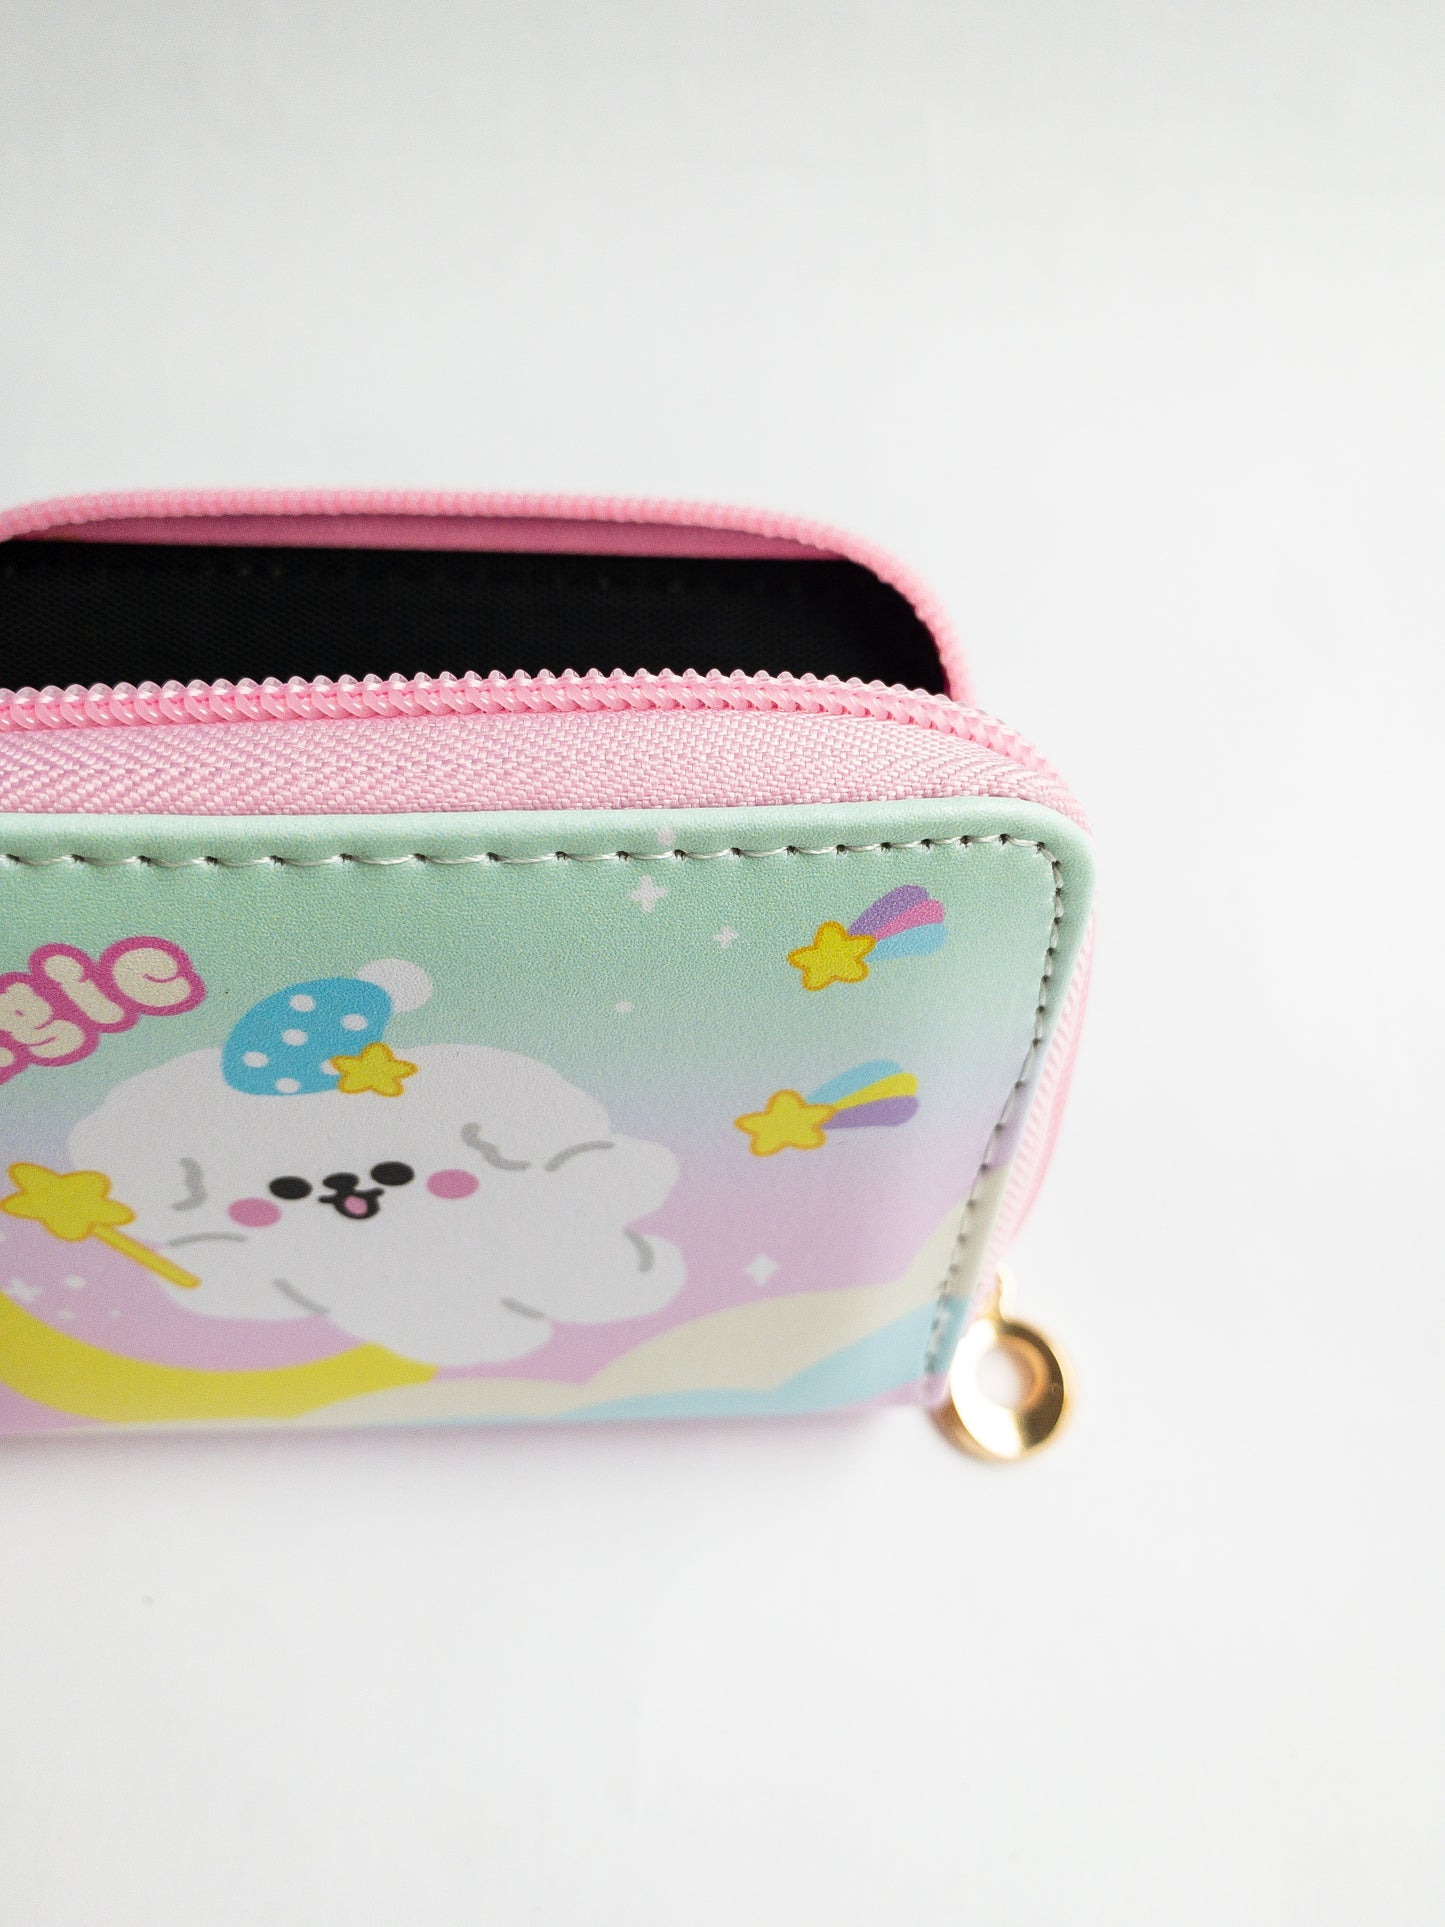 The Shooting Star Wallet! A magical little fluffy dog soars through a pastel rainbow sky with shooting stars. A playful zip close wallet with card slots and a coin pocket in the center, it’s perfect for keeping your small items organized! Reach for the stars with this compact wallet.